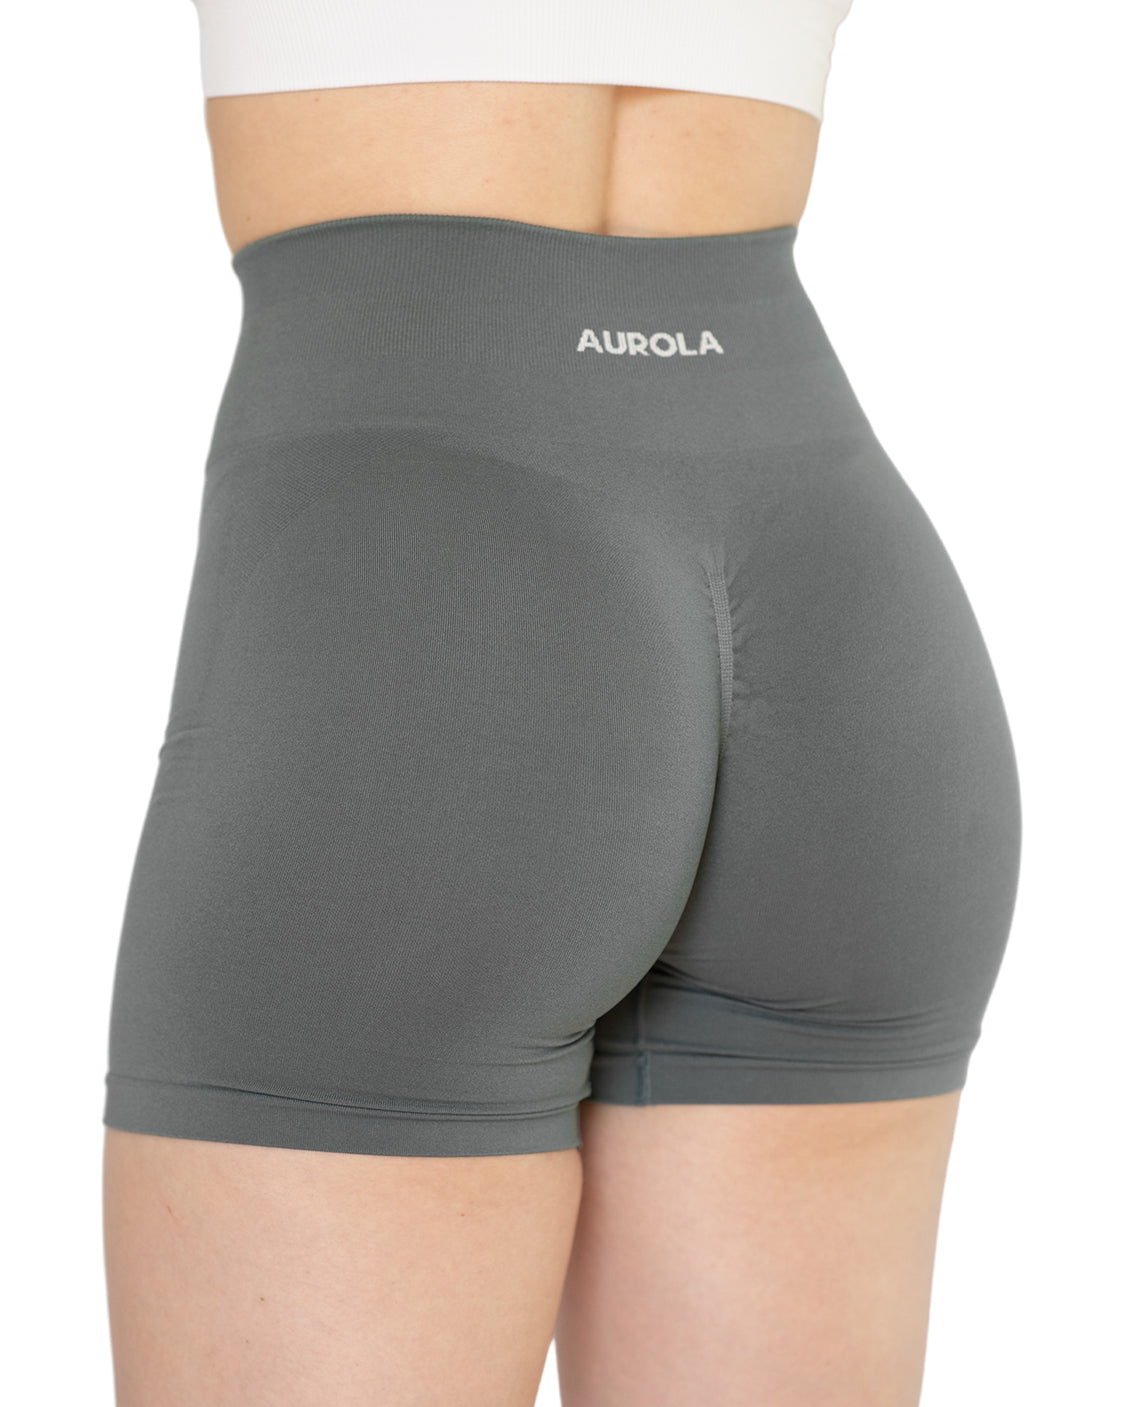 AUROLA 4.5 Intensify Workout Shorts for Women Seamless Scrunch Active  Exercise Fitness Amplify Shorts